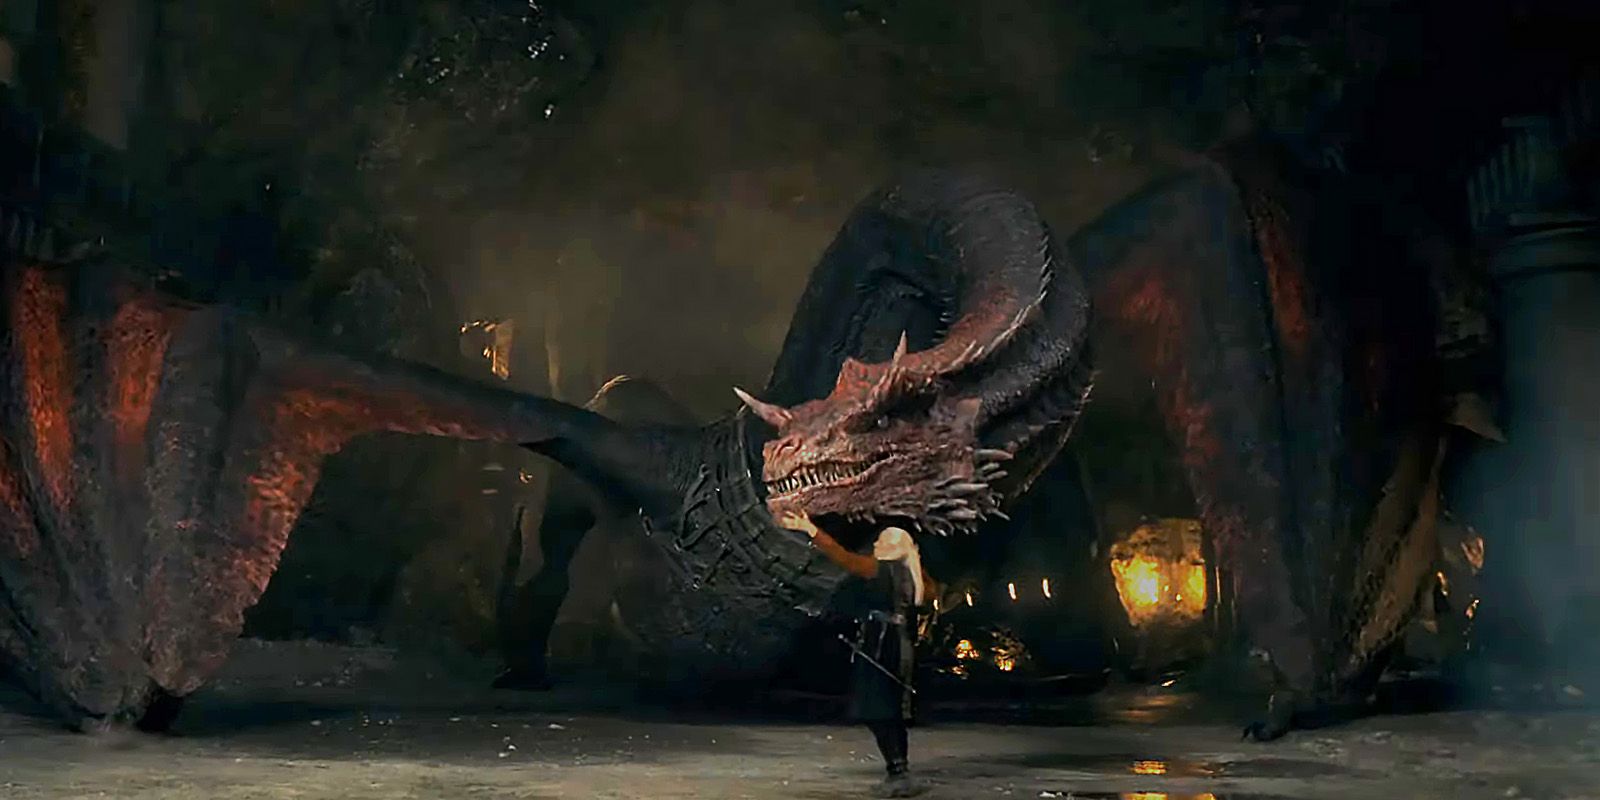 House of the Dragon, Return to Dragonstone., HBO Max, Game of Thrones, Return to Dragonstone. #HouseoftheDragon and #GameofThrones are streaming  on HBO Max., By HBO